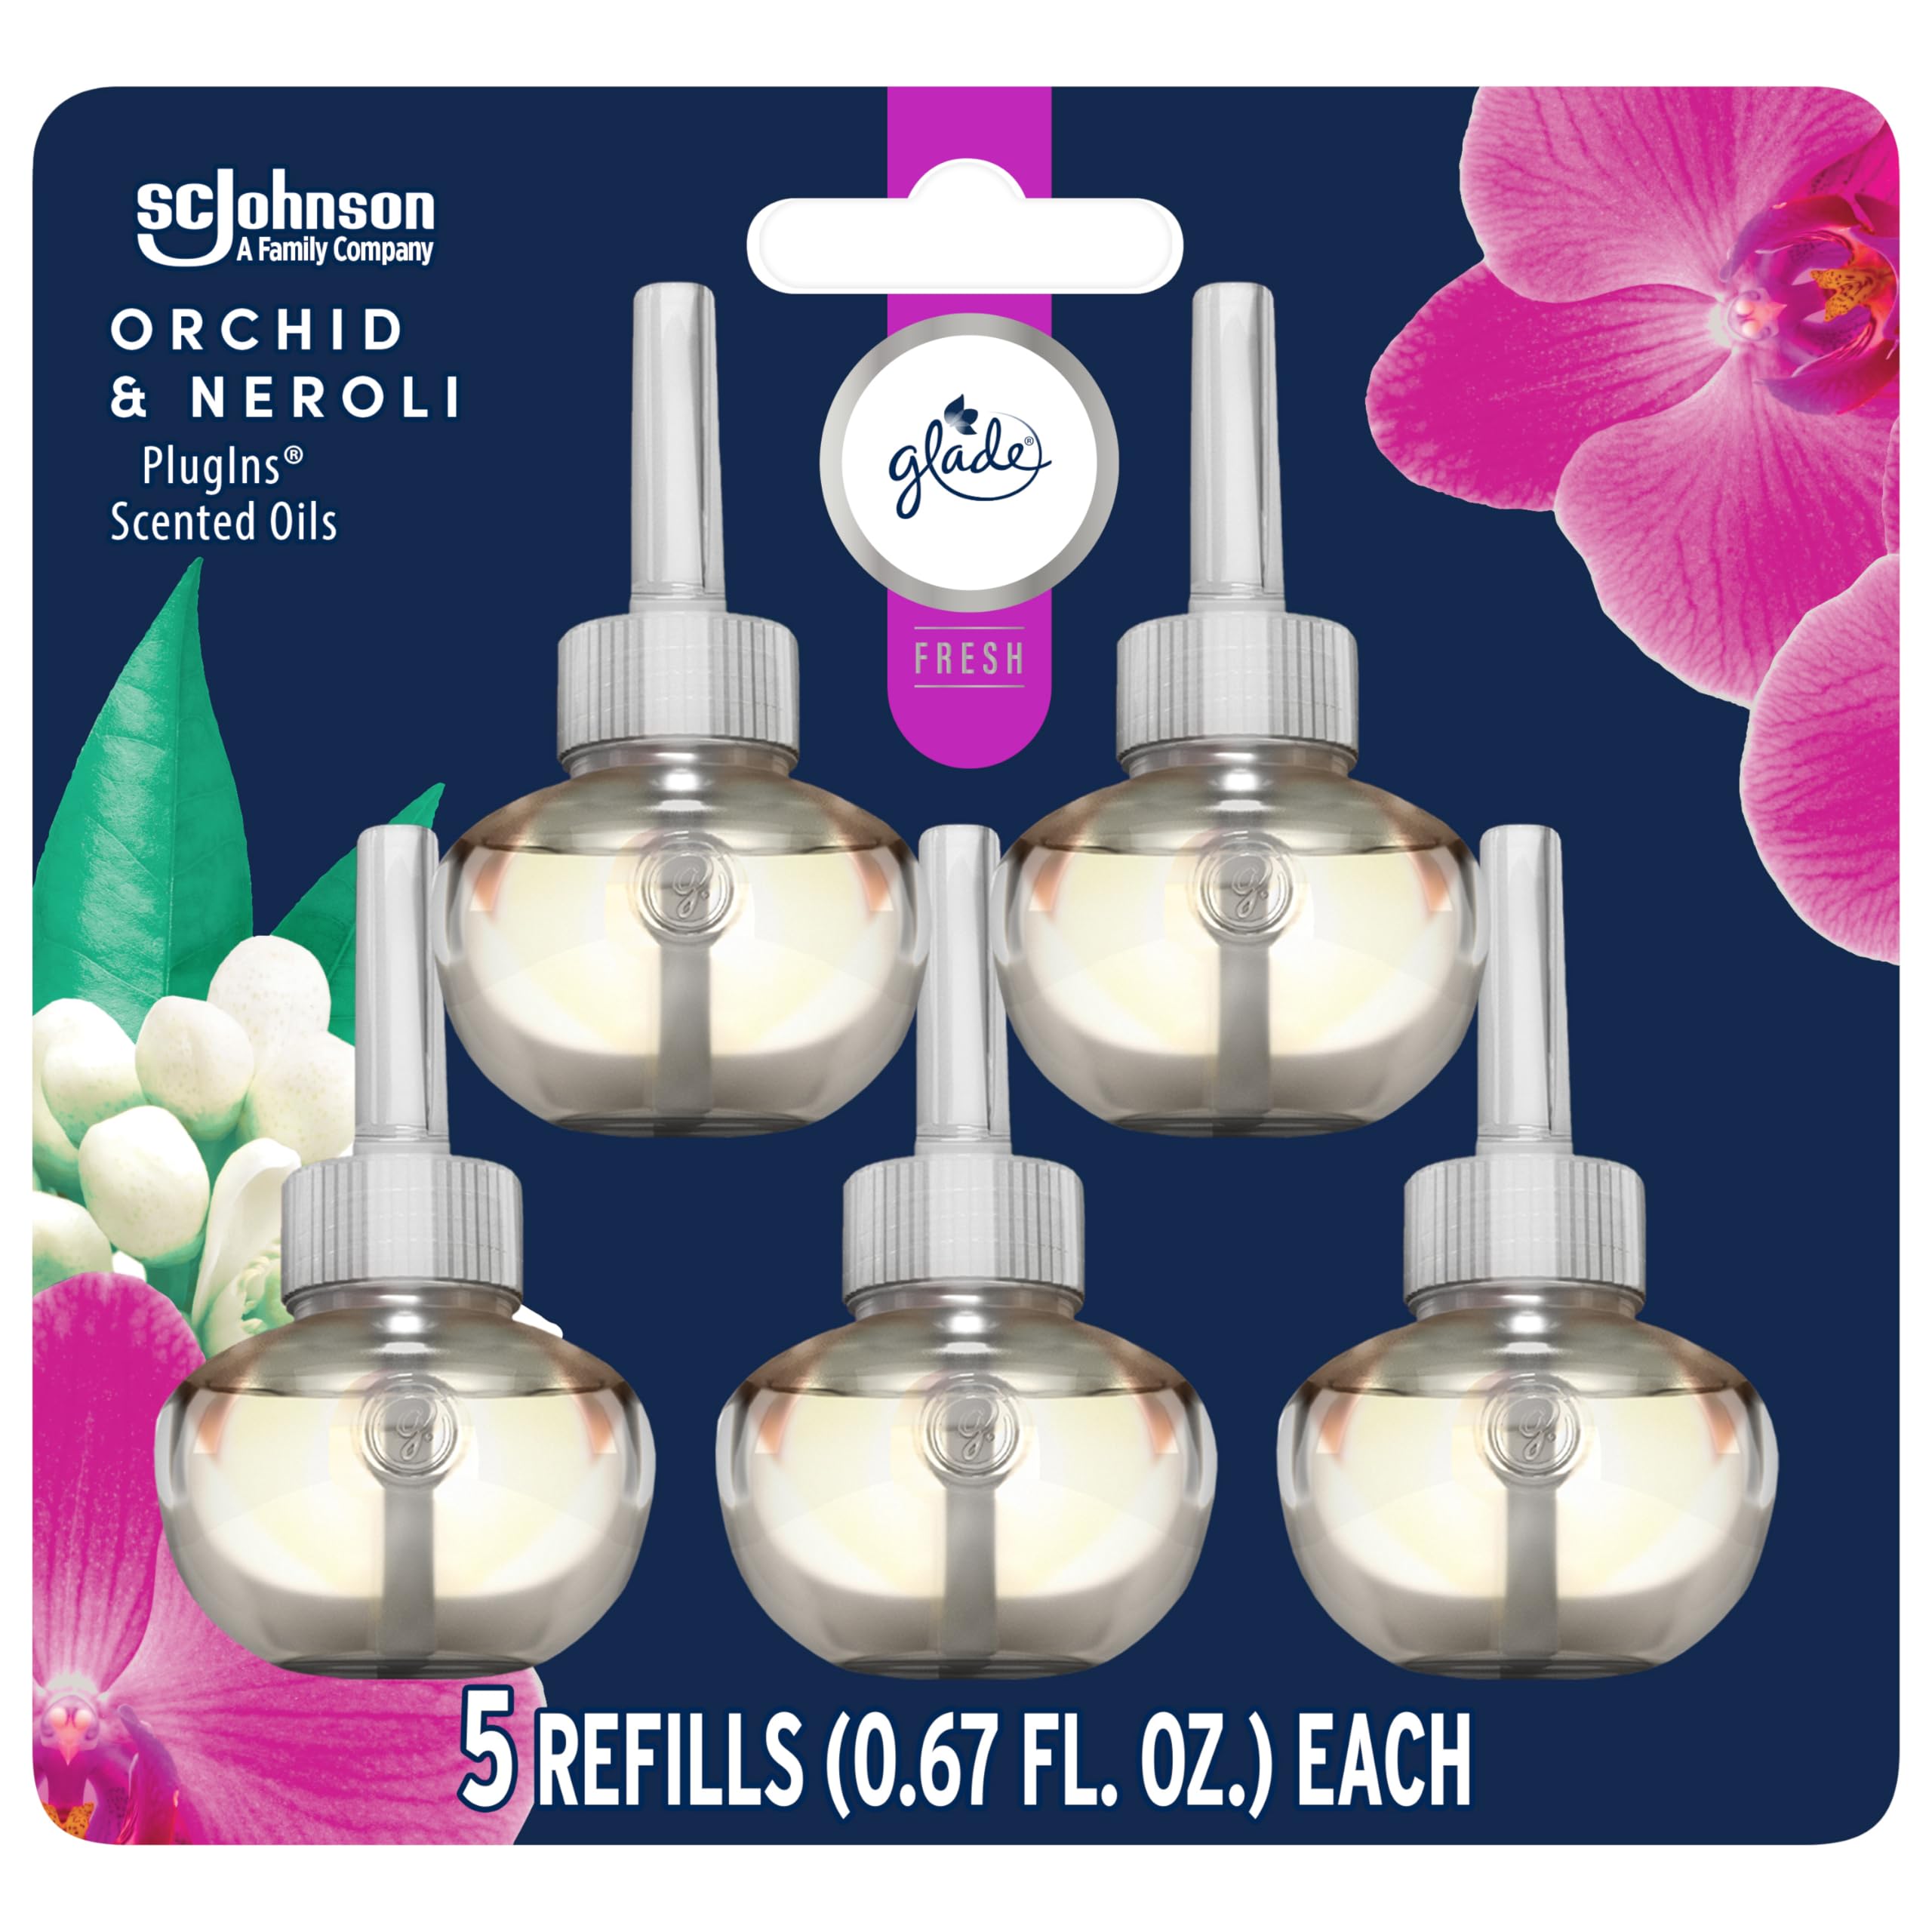 Glade PlugIns Refills Air Freshener, Scented and Essential Oils for Home and Bathroom, Orchid & Neroli, Fresh Collection 3.35 Fl Oz, 5 Count